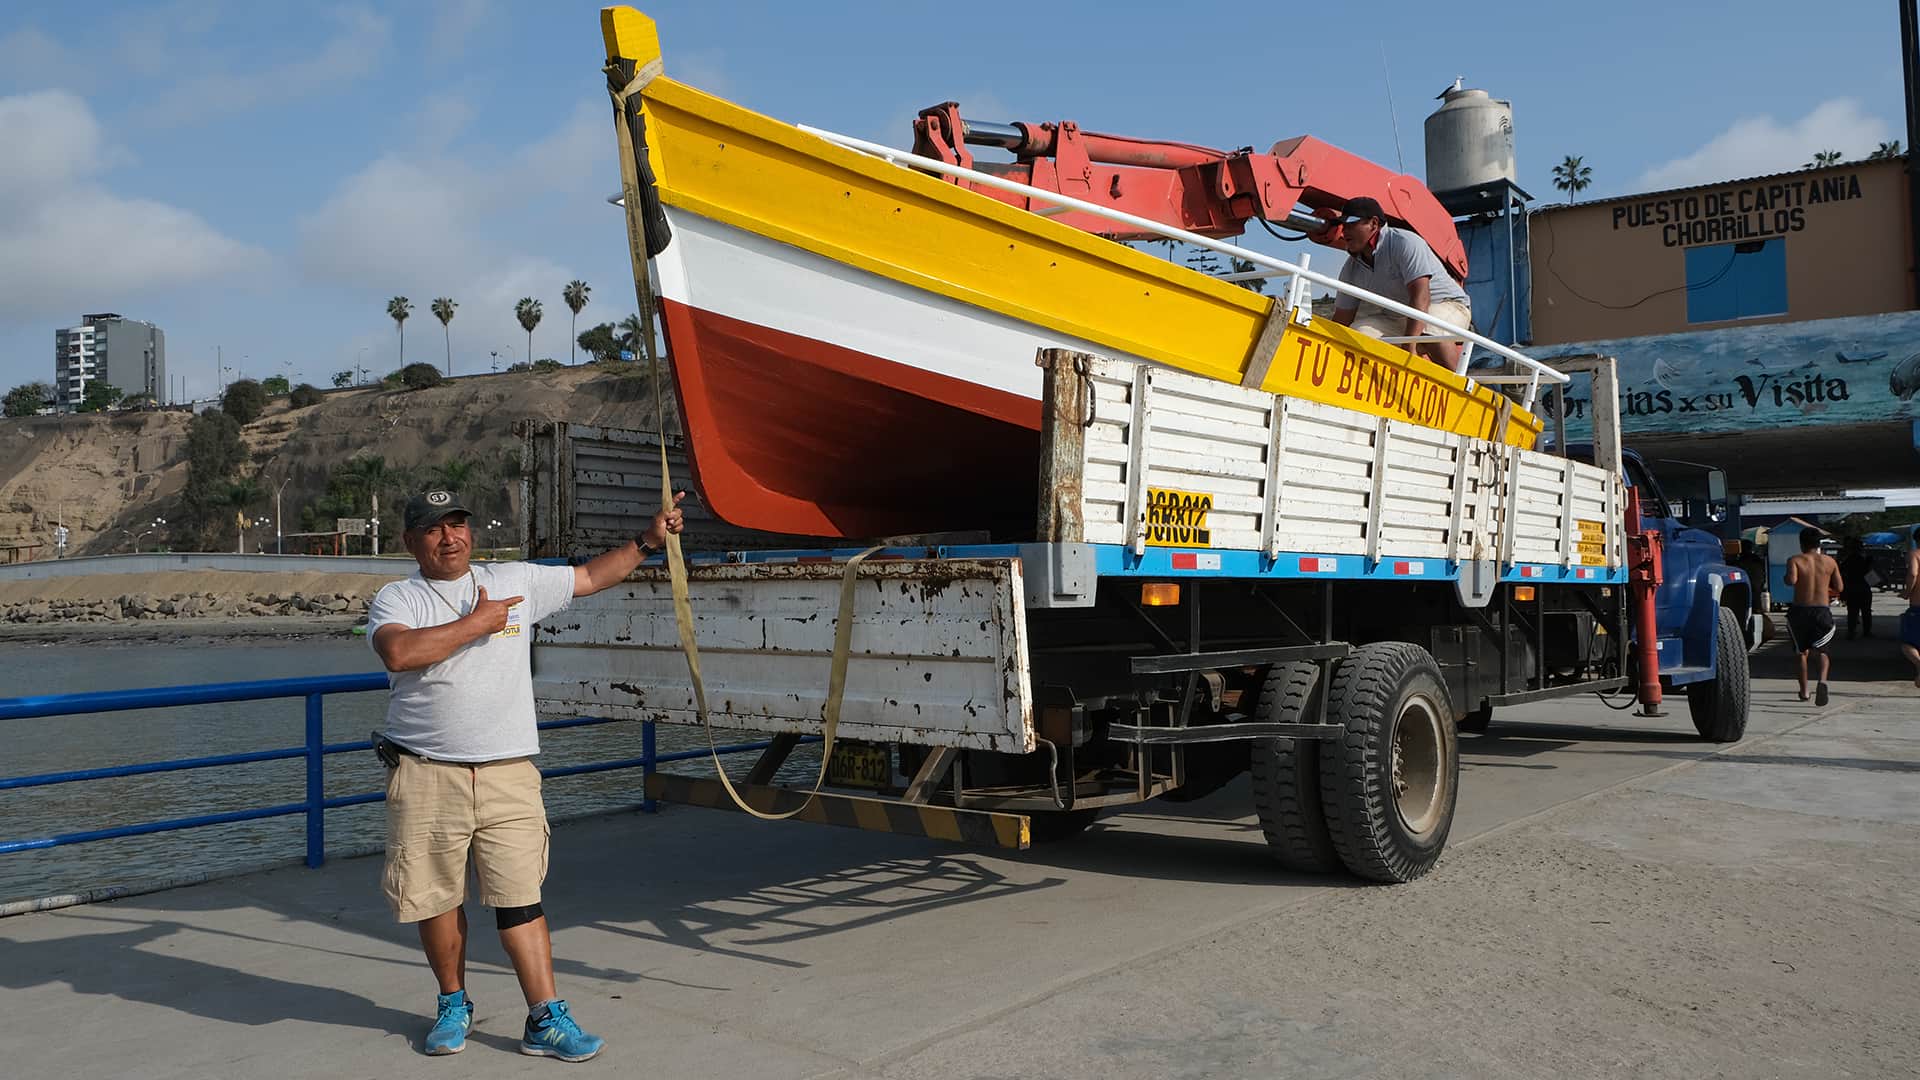 11Fisherman proudly showing his brand new boat | Responsible Travel Peru